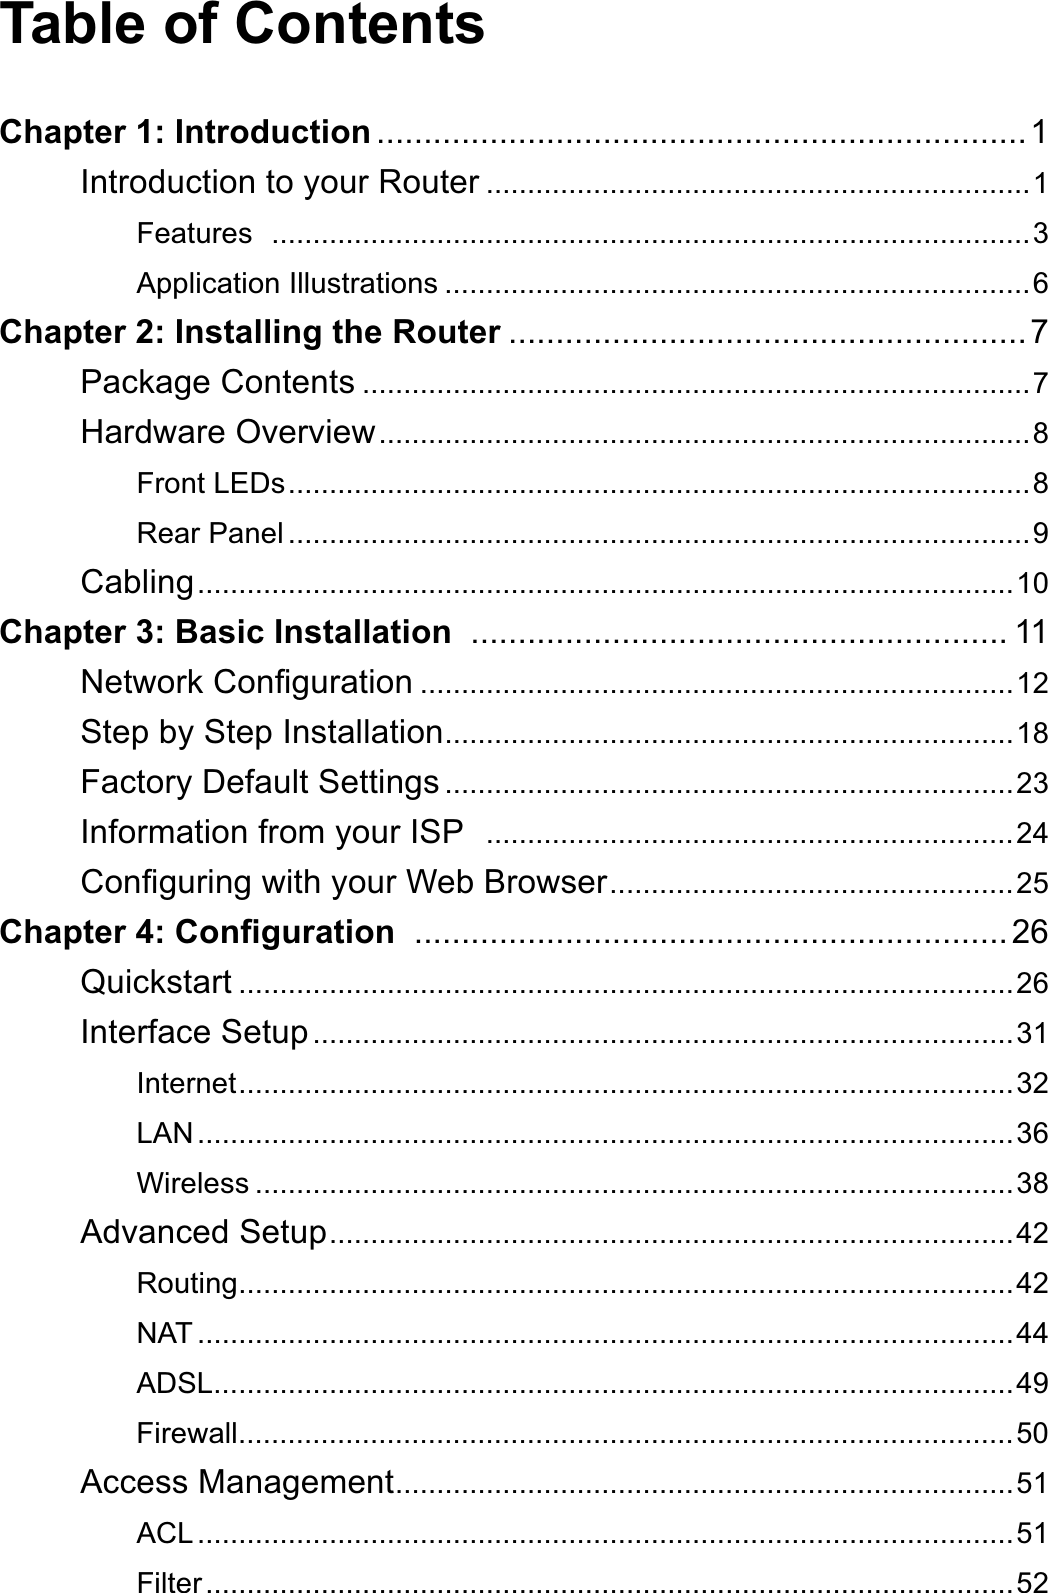 Table of ContentsChapter 1: Introduction .....................................................................1Introduction to your Router ..................................................................1Features ............................................................................................3Application Illustrations .......................................................................6Chapter 2: Installing the Router .......................................................7Package Contents .................................................................................7Hardware Overview...............................................................................8Front LEDs..........................................................................................8Rear Panel ..........................................................................................9Cabling...................................................................................................10Chapter 3: Basic Installation ......................................................... 111HWZRUN&amp;RQ¿JXUDWLRQ ........................................................................12Step by Step Installation.....................................................................18Factory Default Settings .....................................................................23Information from your ISP  ................................................................24&amp;RQ¿JXULQJZLWK\RXU:HE%URZVHU.................................................25&amp;KDSWHU&amp;RQ¿JXUDWLRQ ...............................................................26Quickstart ..............................................................................................26Interface Setup.....................................................................................31Internet..............................................................................................32LAN...................................................................................................36:LUHOHVV ............................................................................................38Advanced Setup...................................................................................42Routing..............................................................................................42NAT ...................................................................................................44ADSL.................................................................................................49Firewall..............................................................................................50Access Management...........................................................................51ACL...................................................................................................51Filter..................................................................................................52